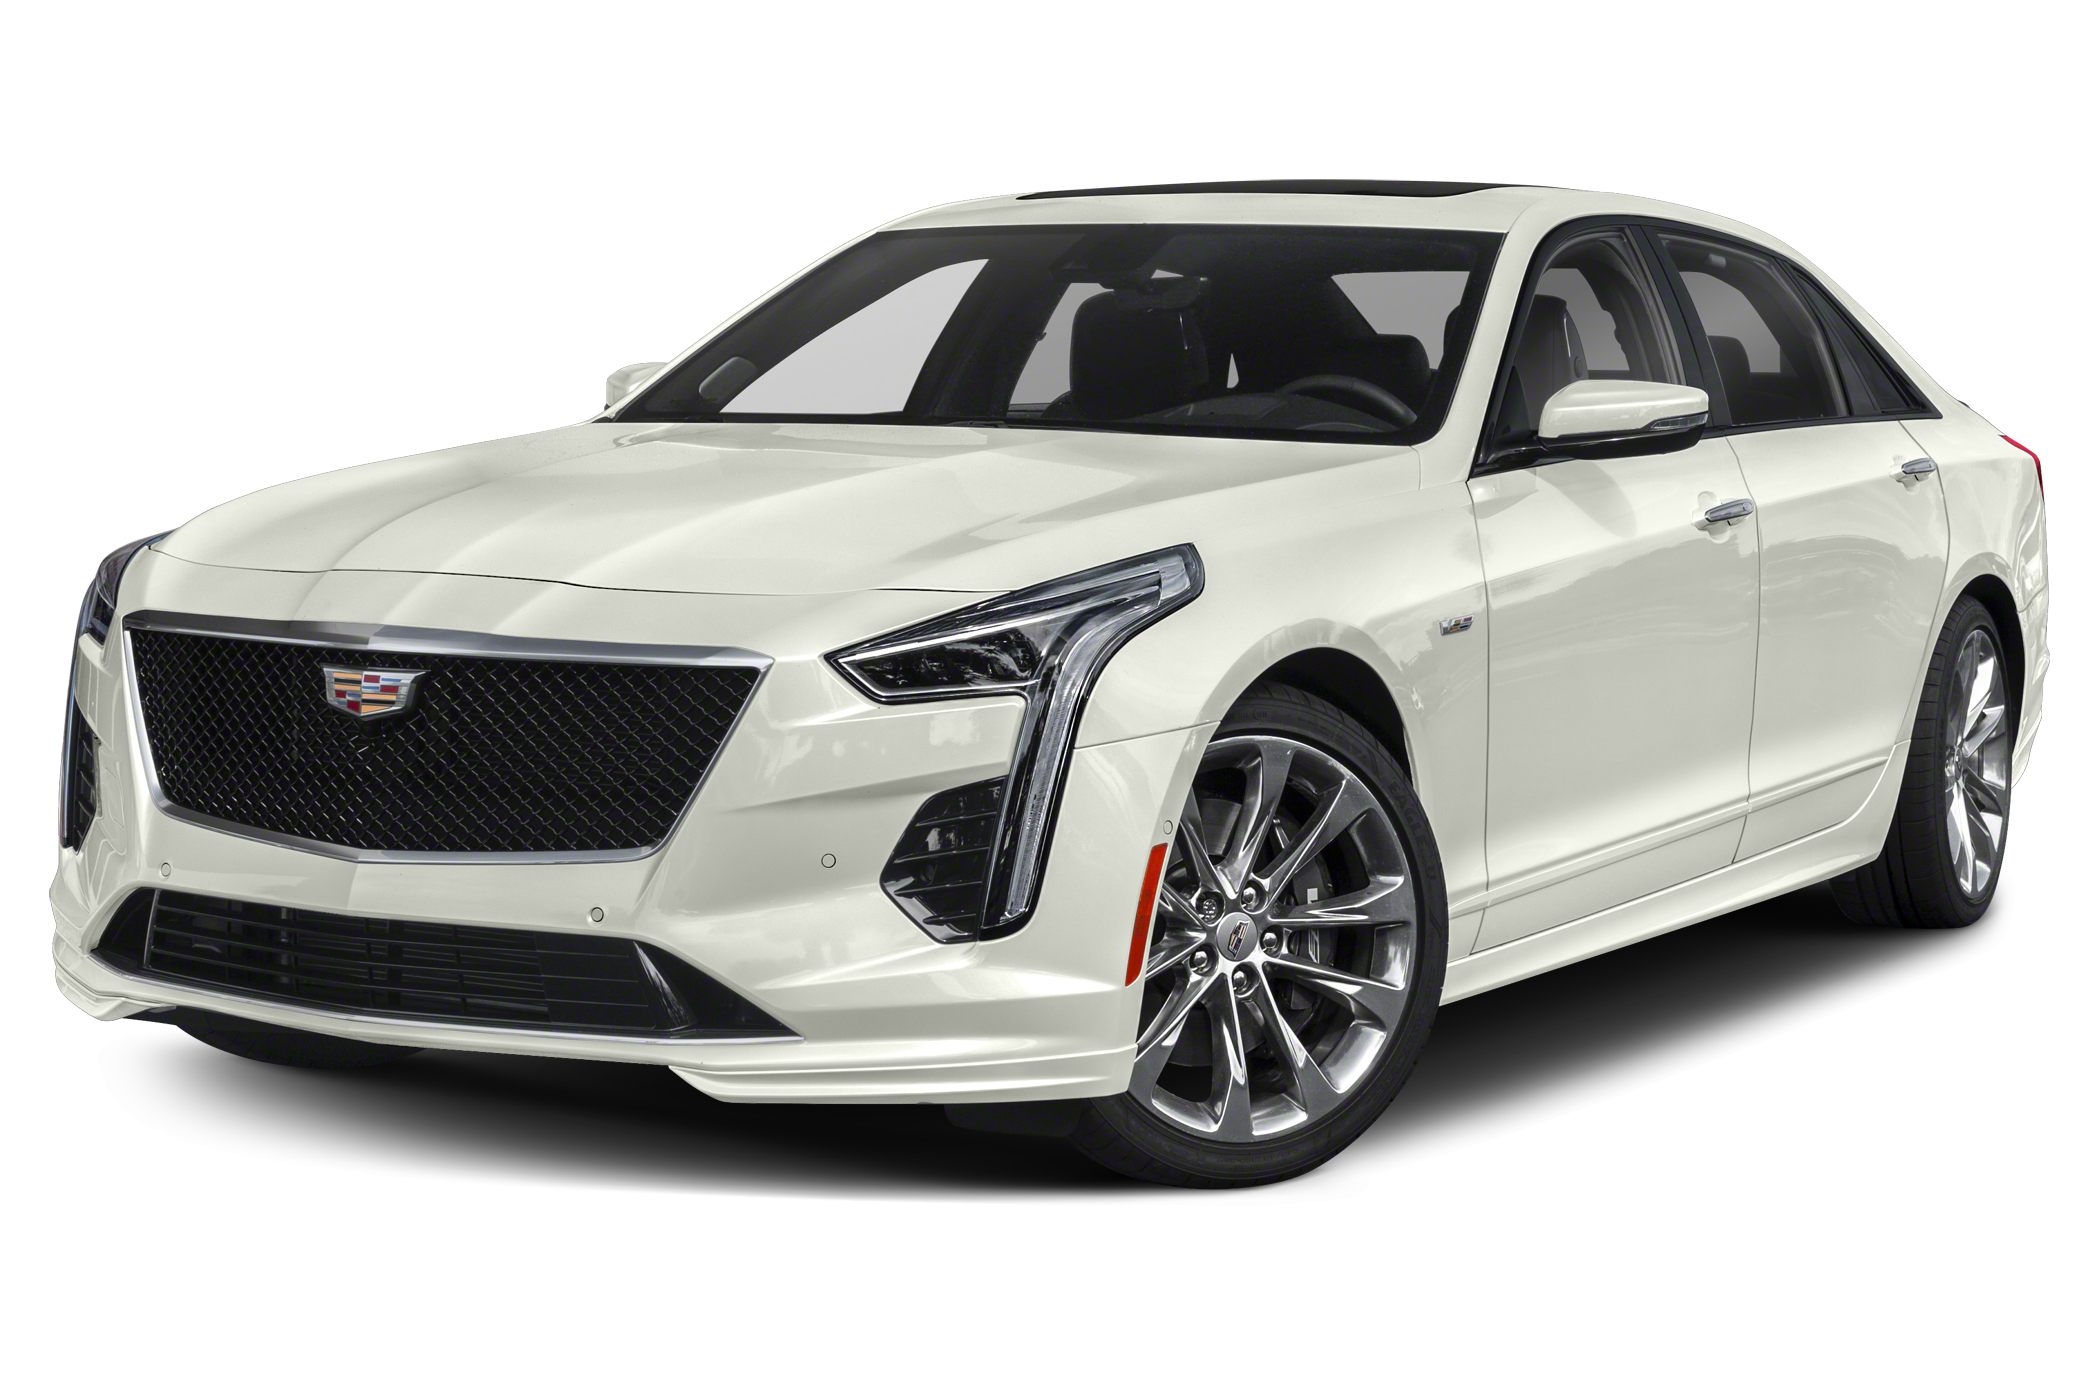 2019 Cadillac Ct6 V 4 2l Blackwing Twin Turbo 4dr All Wheel Drive Sedan For Sale